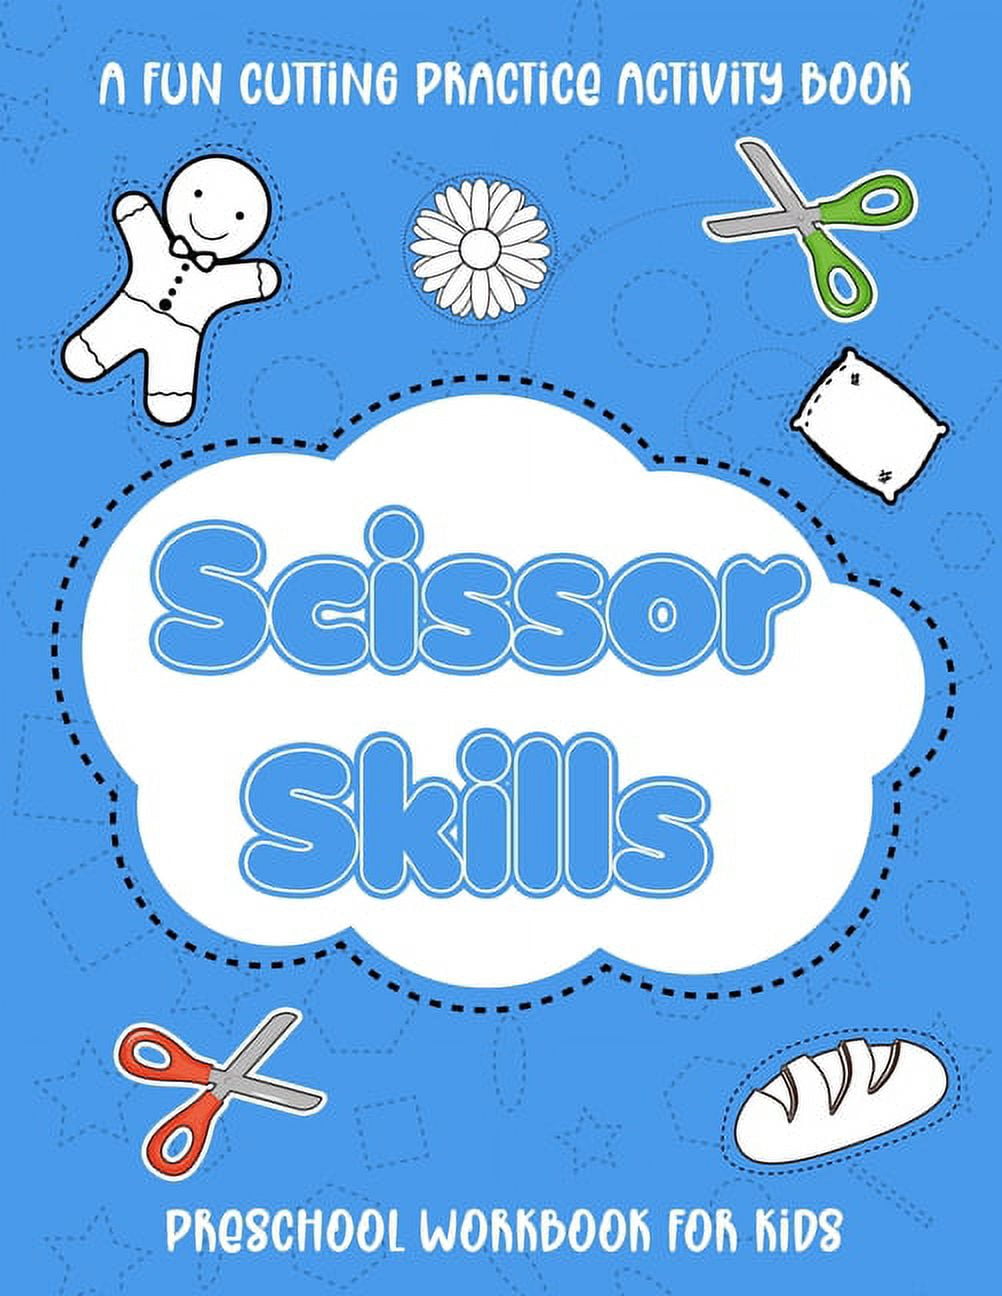 Scissor Skills Donuts: Cut, Color and Paste Activity Book for Kids Ages 3-5 Years Old [Book]